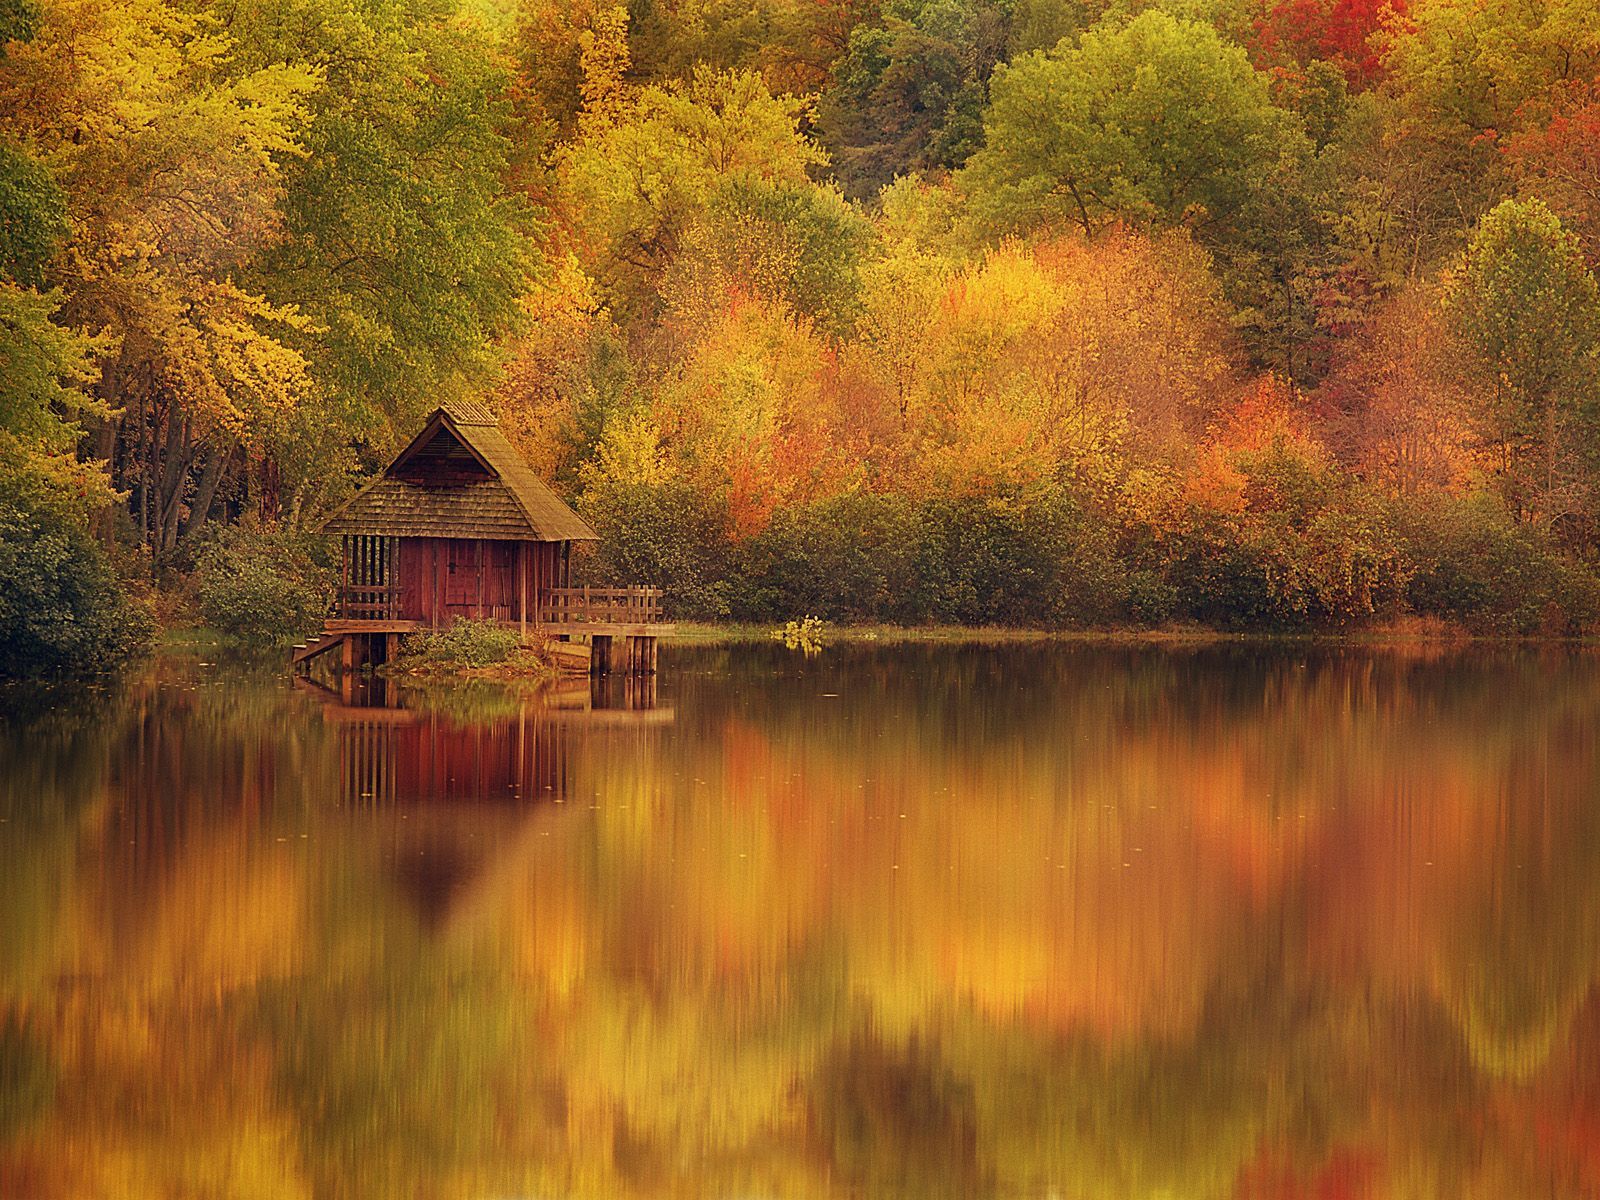 Wooden Cabin on Lake in Autumn